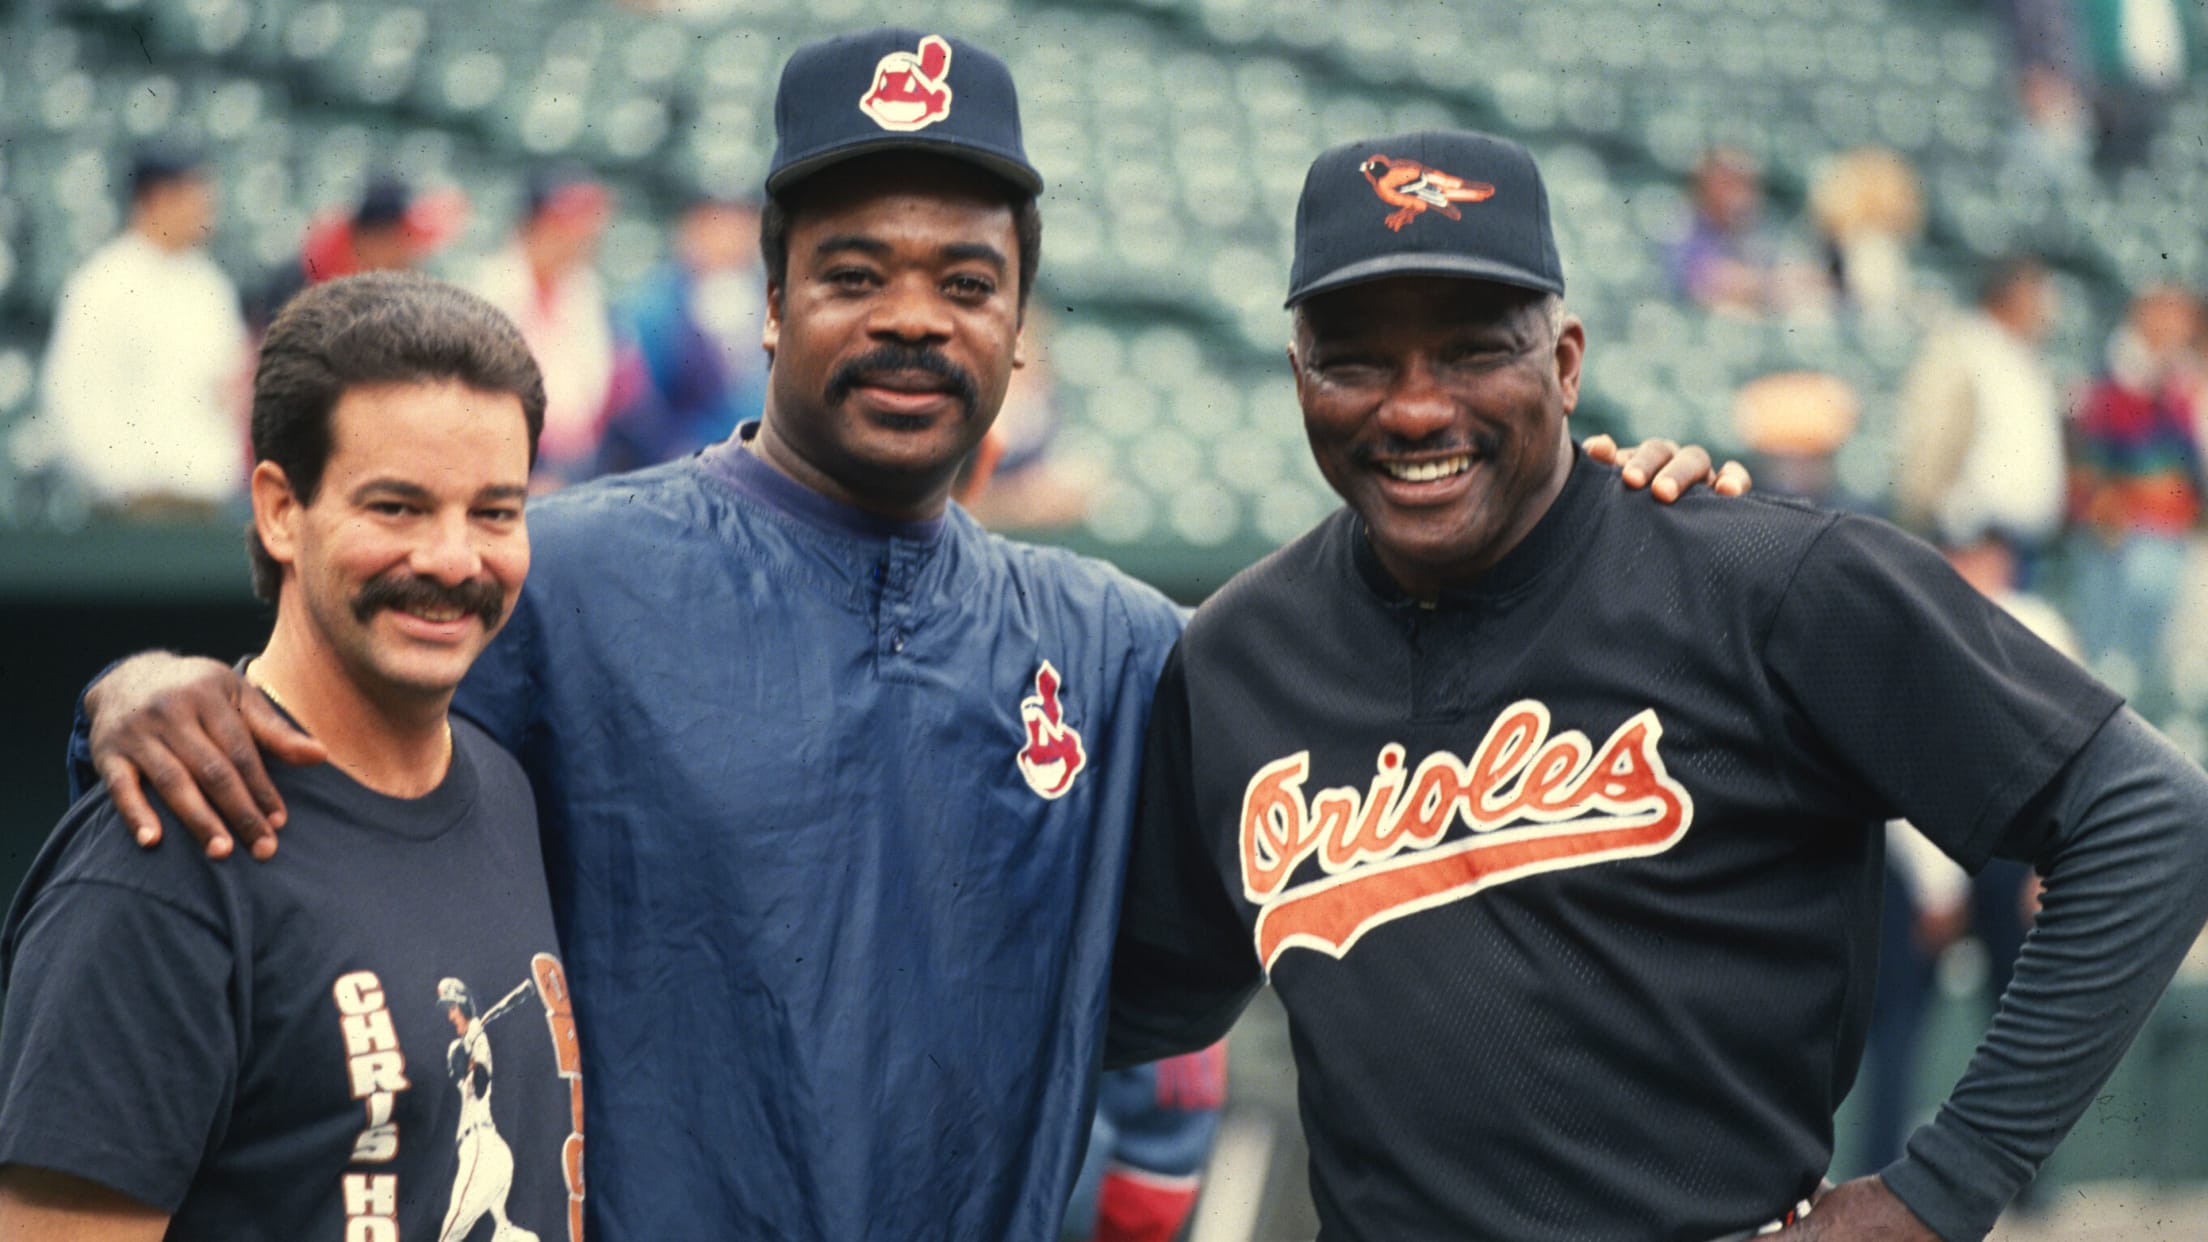 Eddie Murray homers his way past The Mick: On this date in